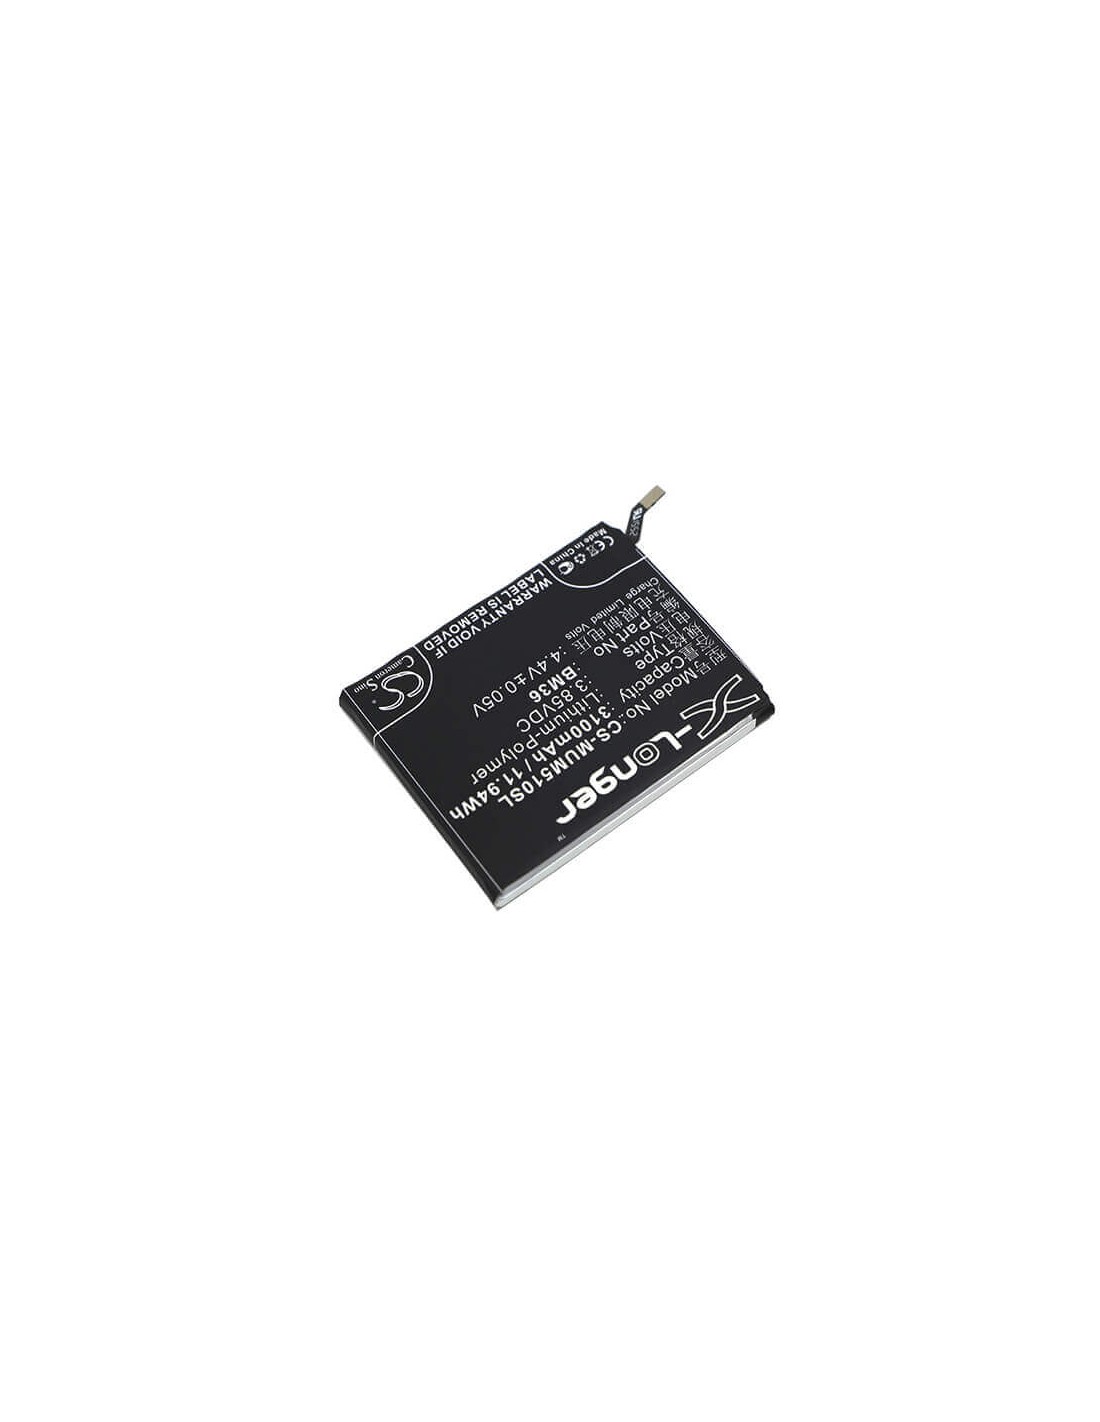 Battery for Xiaomi, Mi 5s, Mi 5s Extreme Edition 3.85V, 3100mAh - 11.94Wh